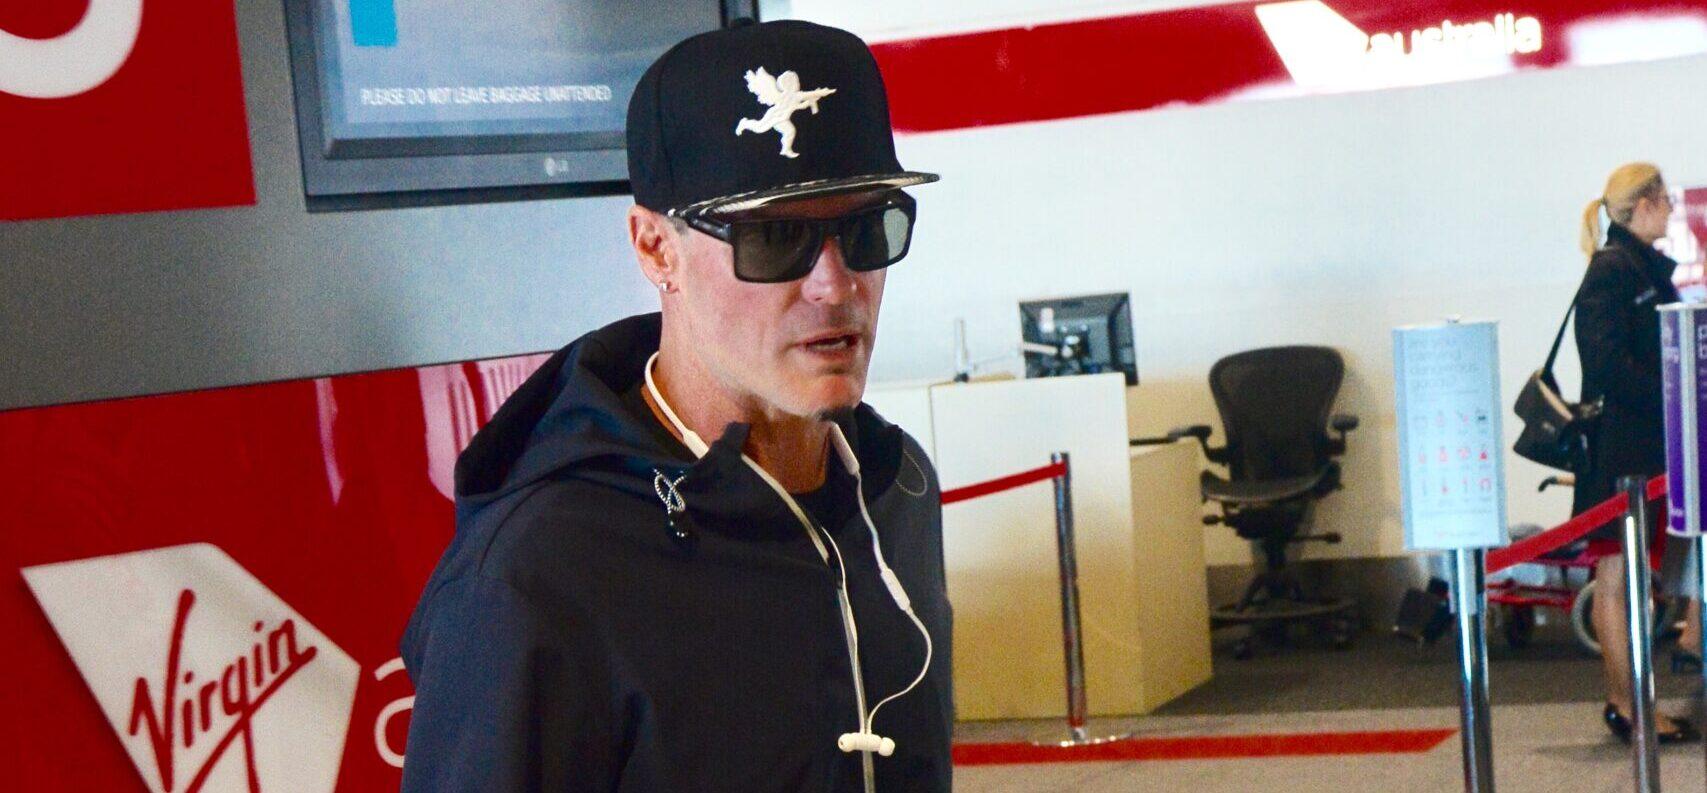 Vanilla Ice is seen arriving at Melbourne airport in Melbourne